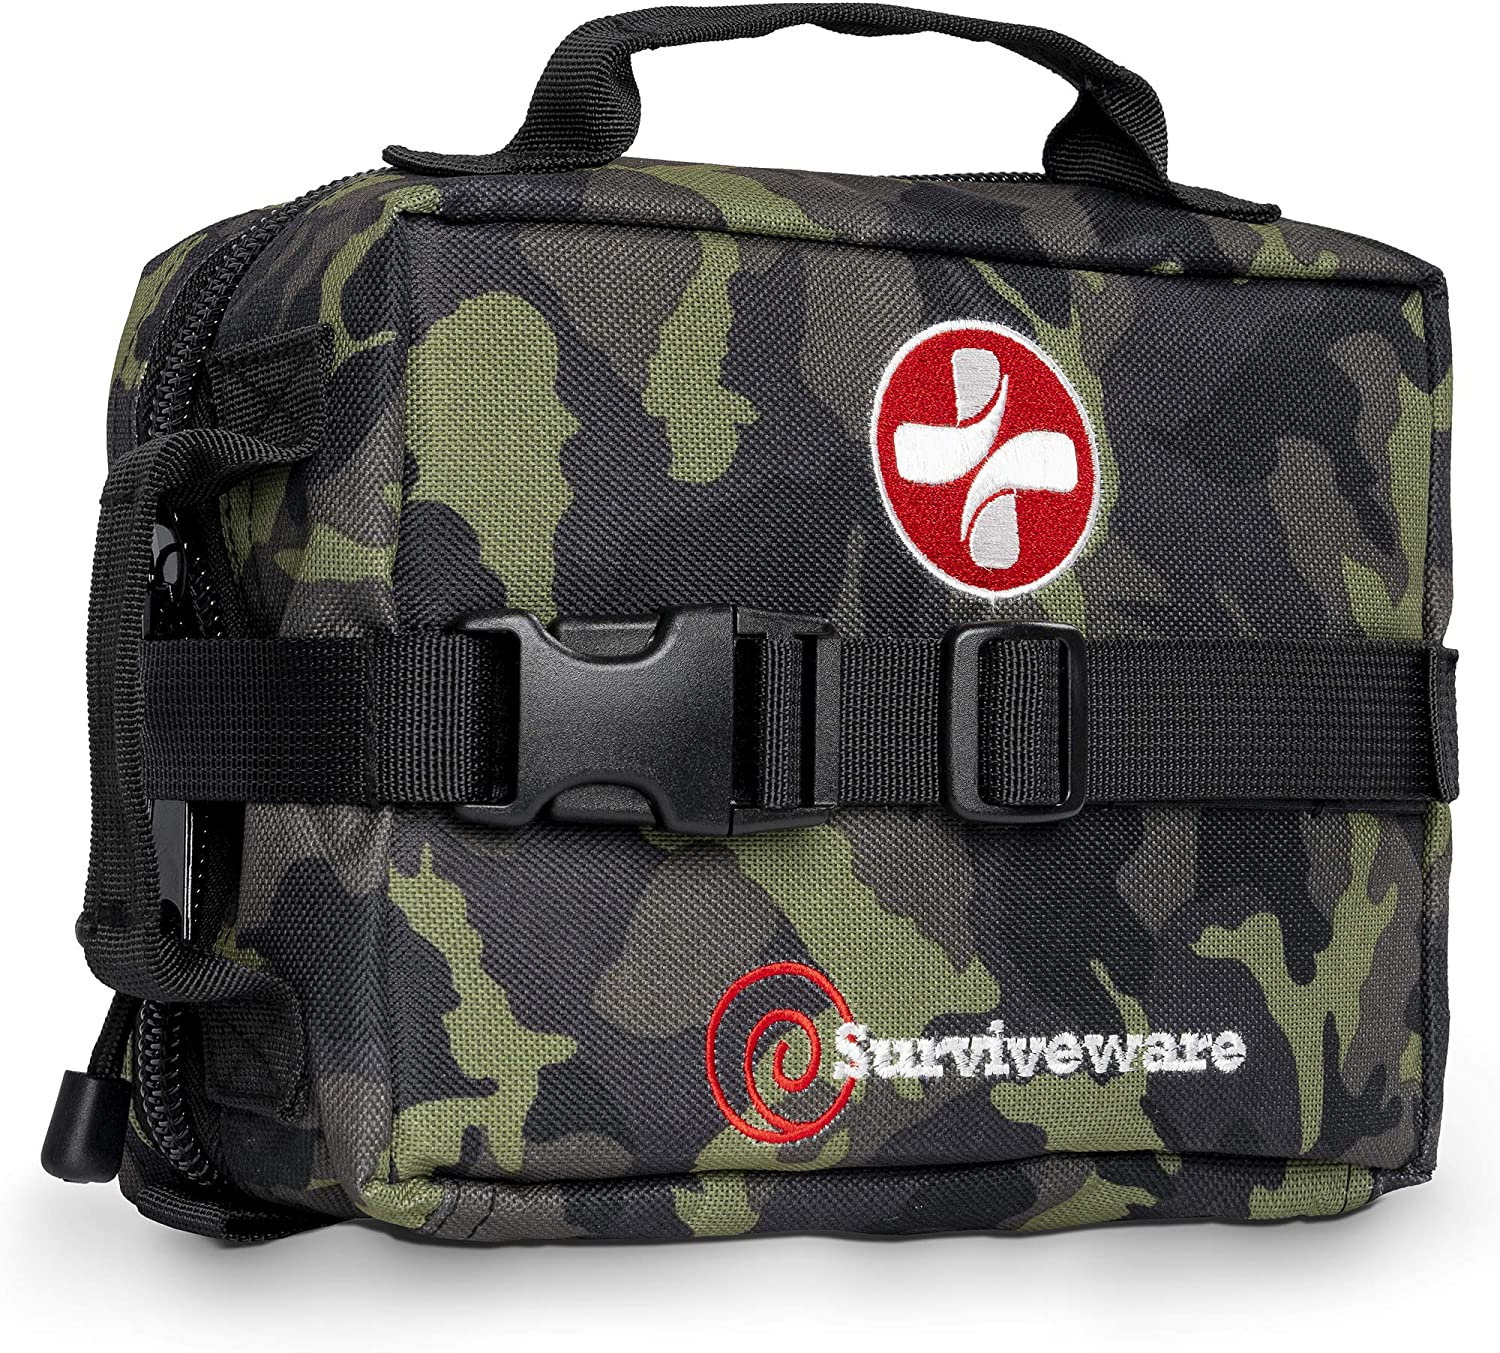 Surviveware Survival First Aid Kit for Outdoor Preparedness